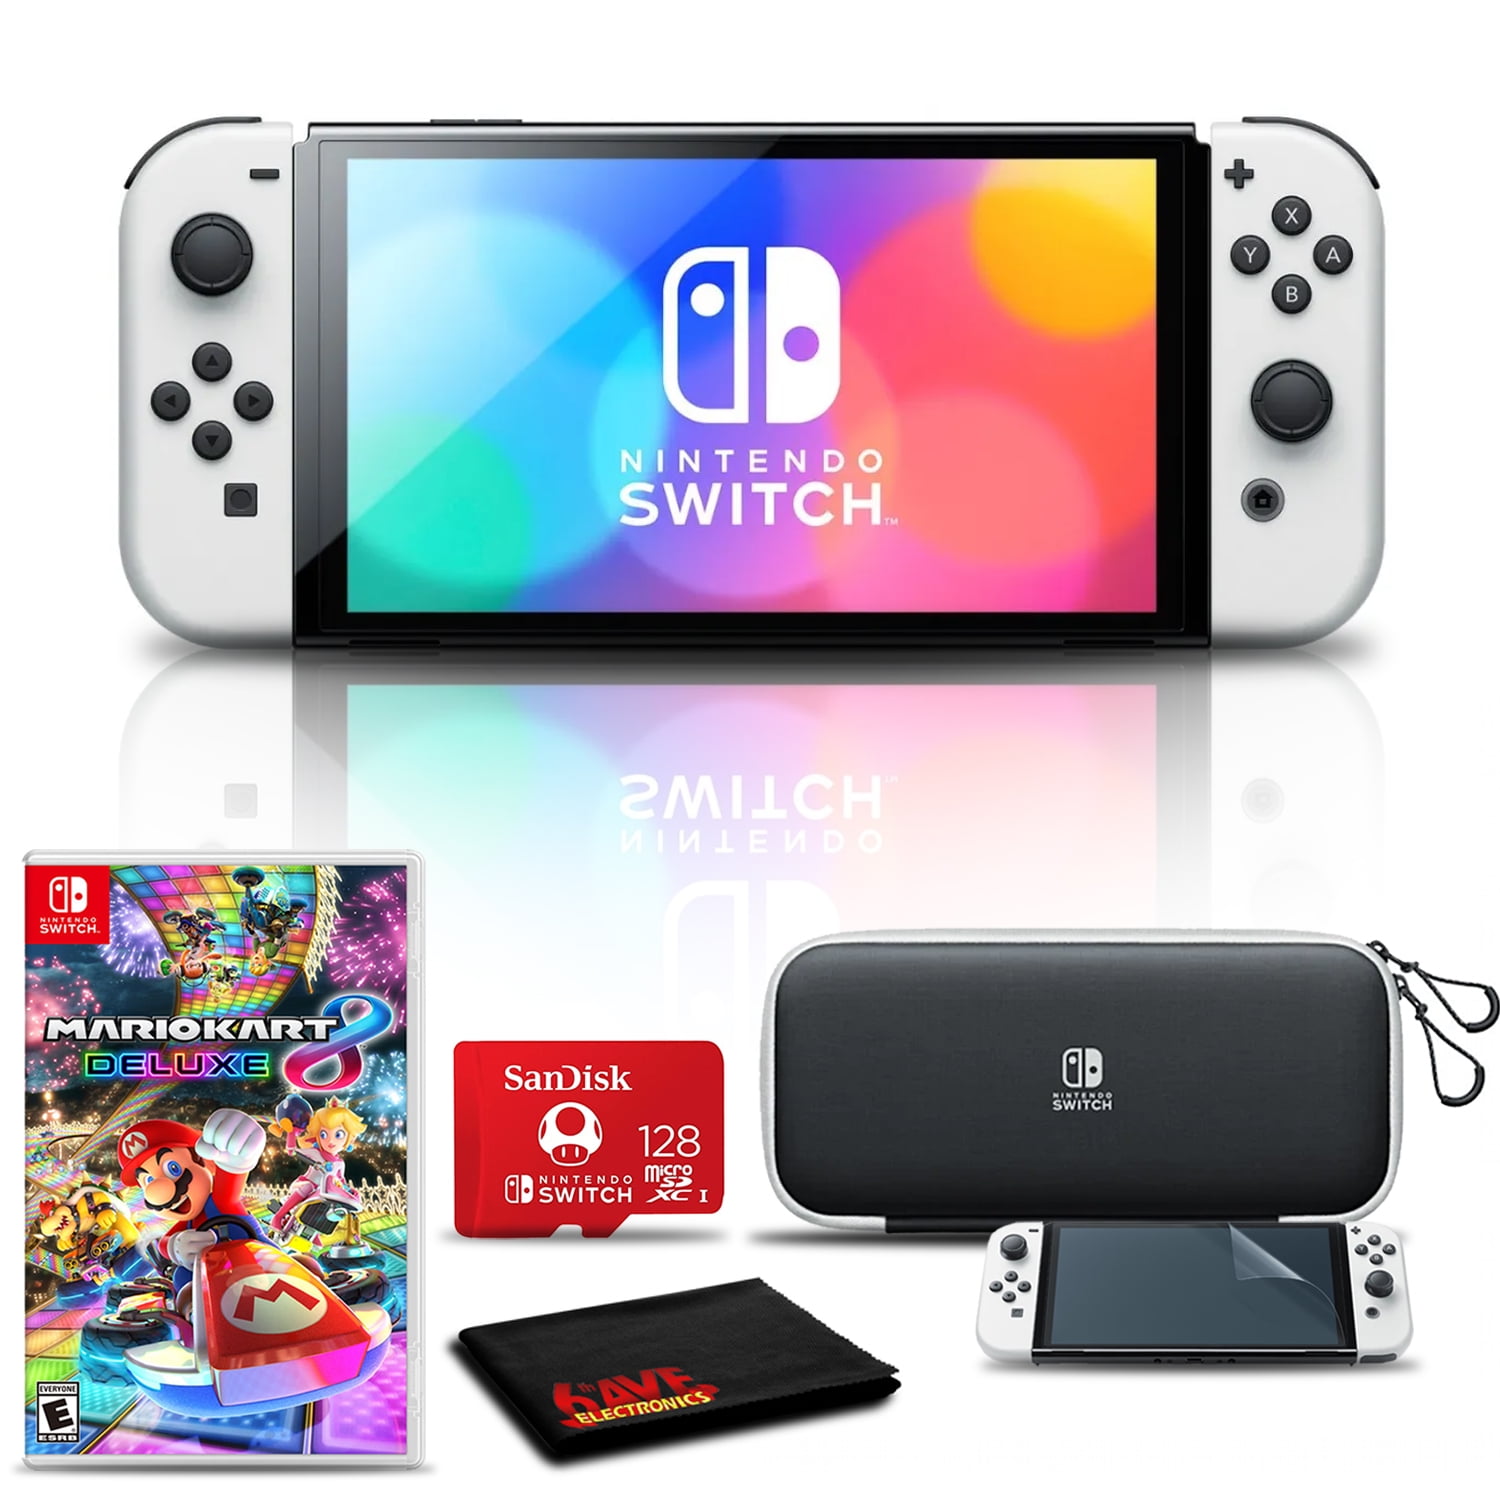 More OLED 8 Luigi, - Peach Deluxe Nintendo + & Switch - 128GB Character Card Group Mario Kart White